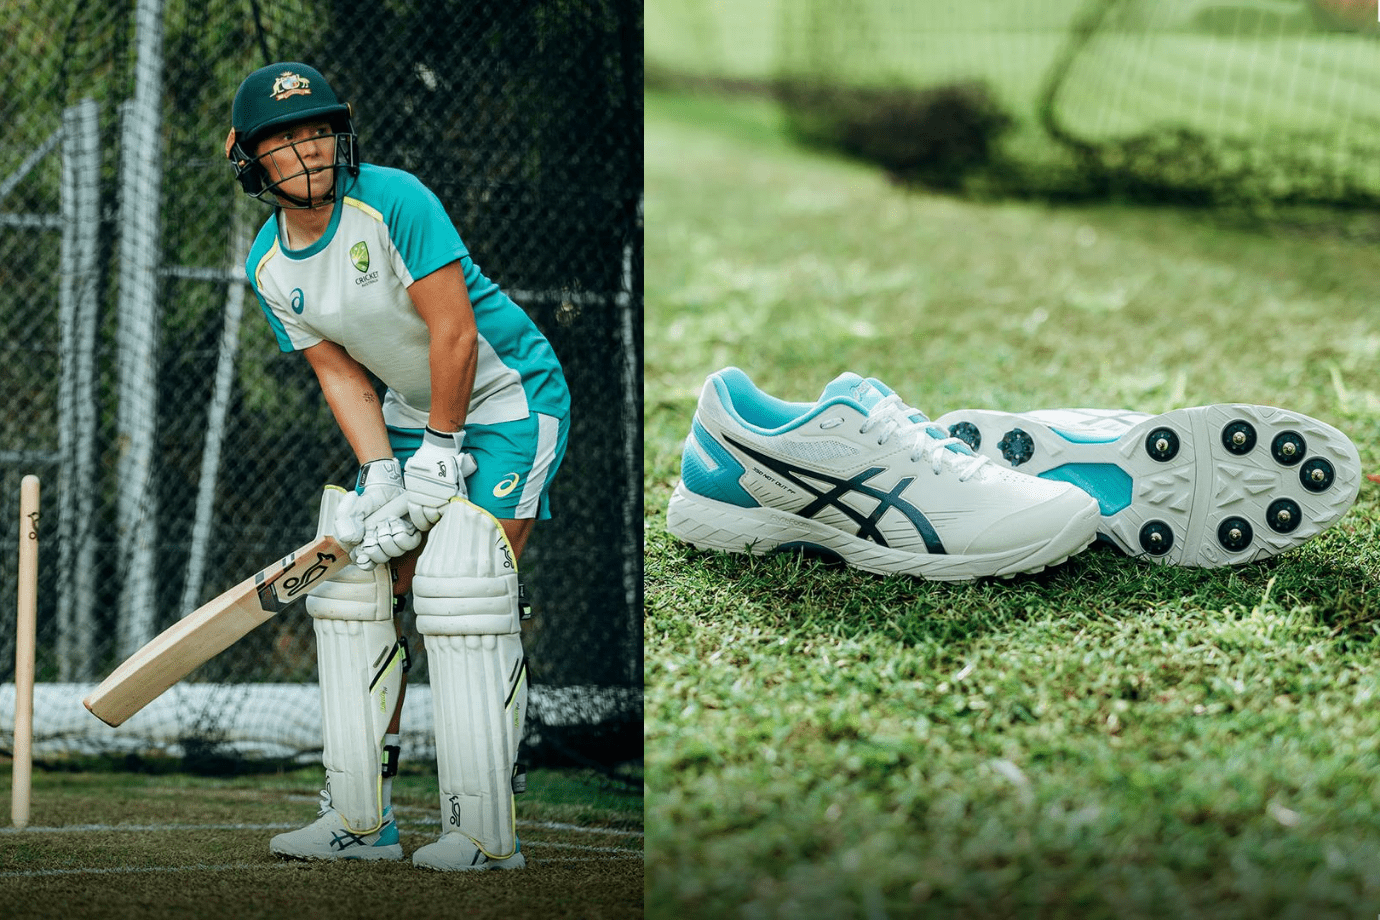 game cricket shoes